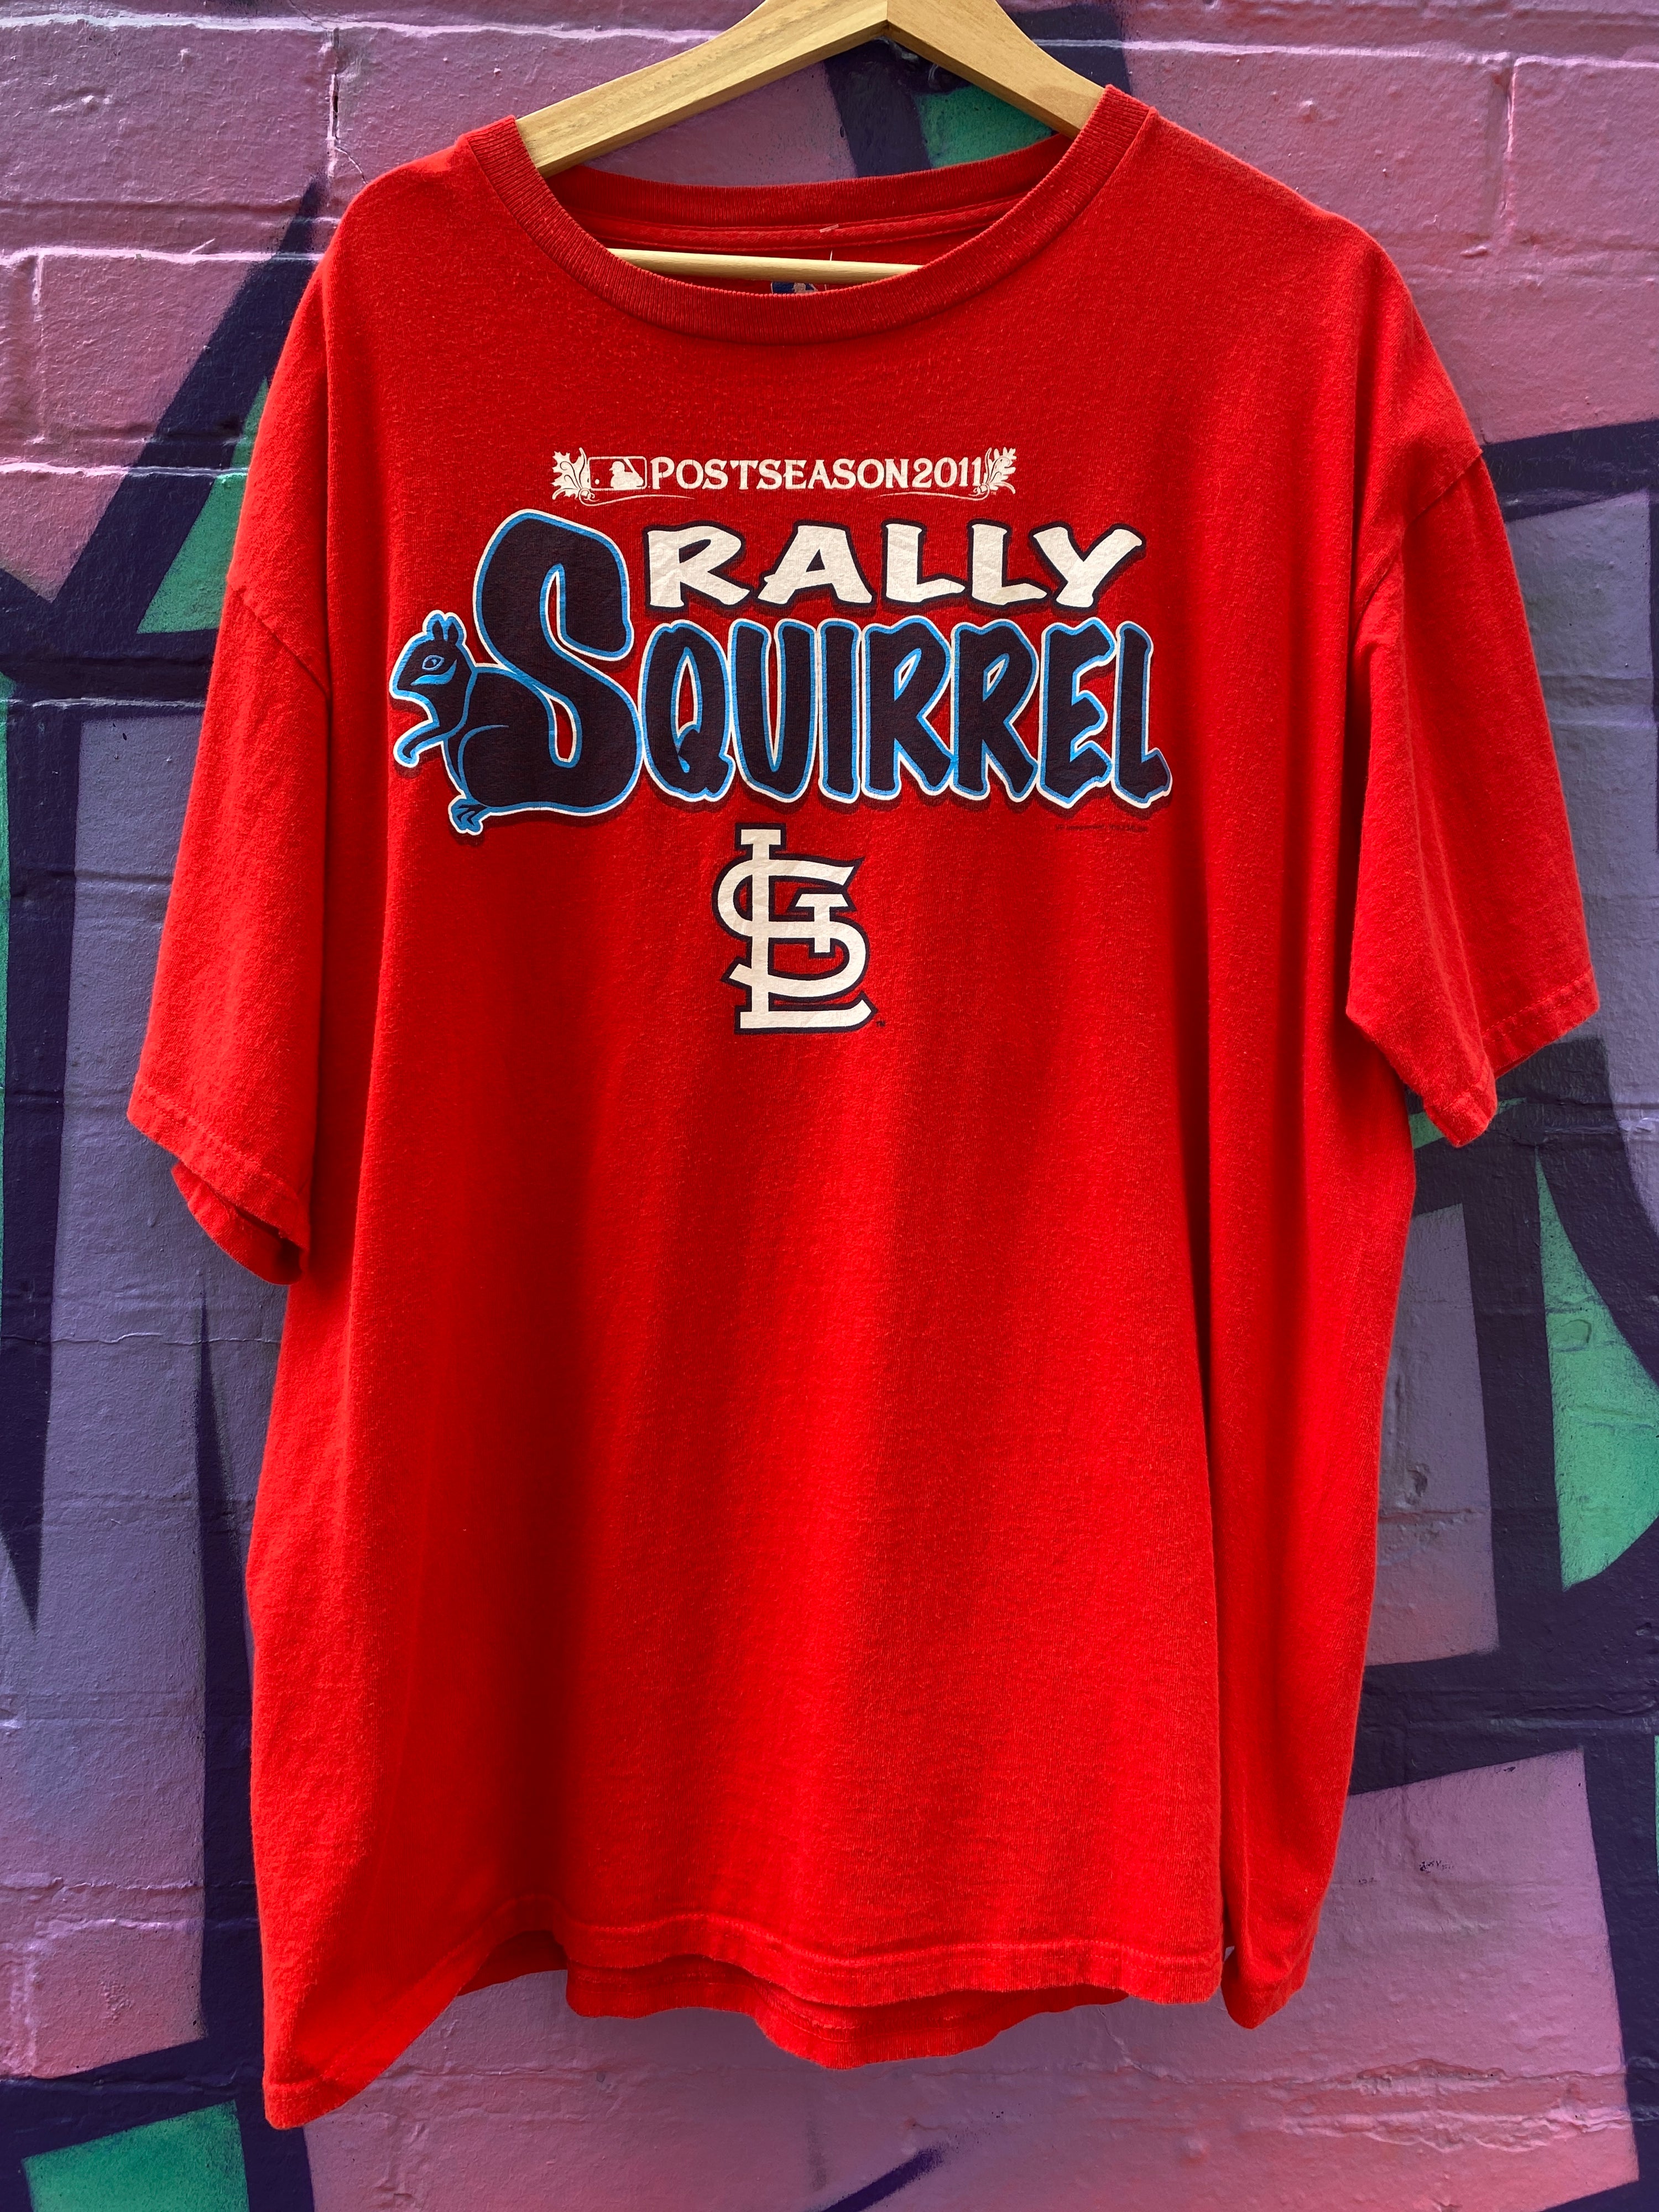 XL - LST 2011 Post Season Rally Squirrel Red Tee